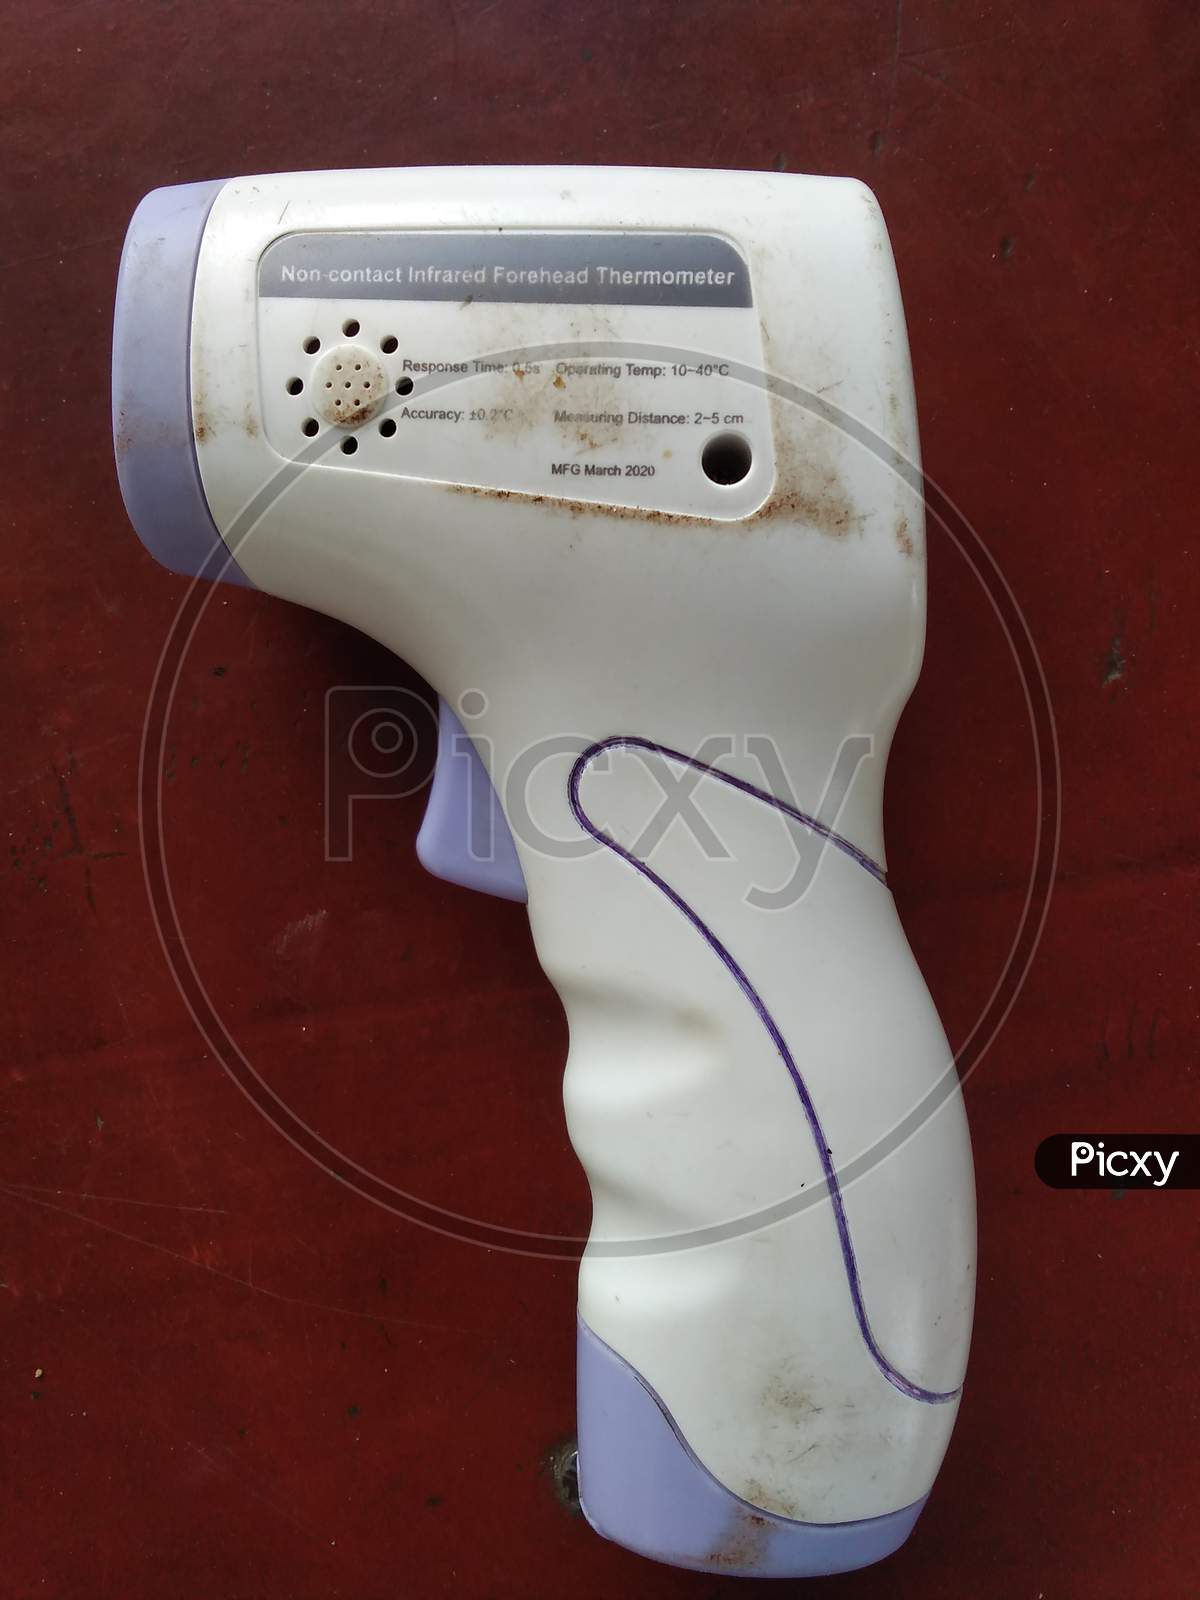 An Infrared Thermometer Used To Find Out The Human Body Temperature As Fever Is One Of The Symptoms Of Covid19 Corona Virus